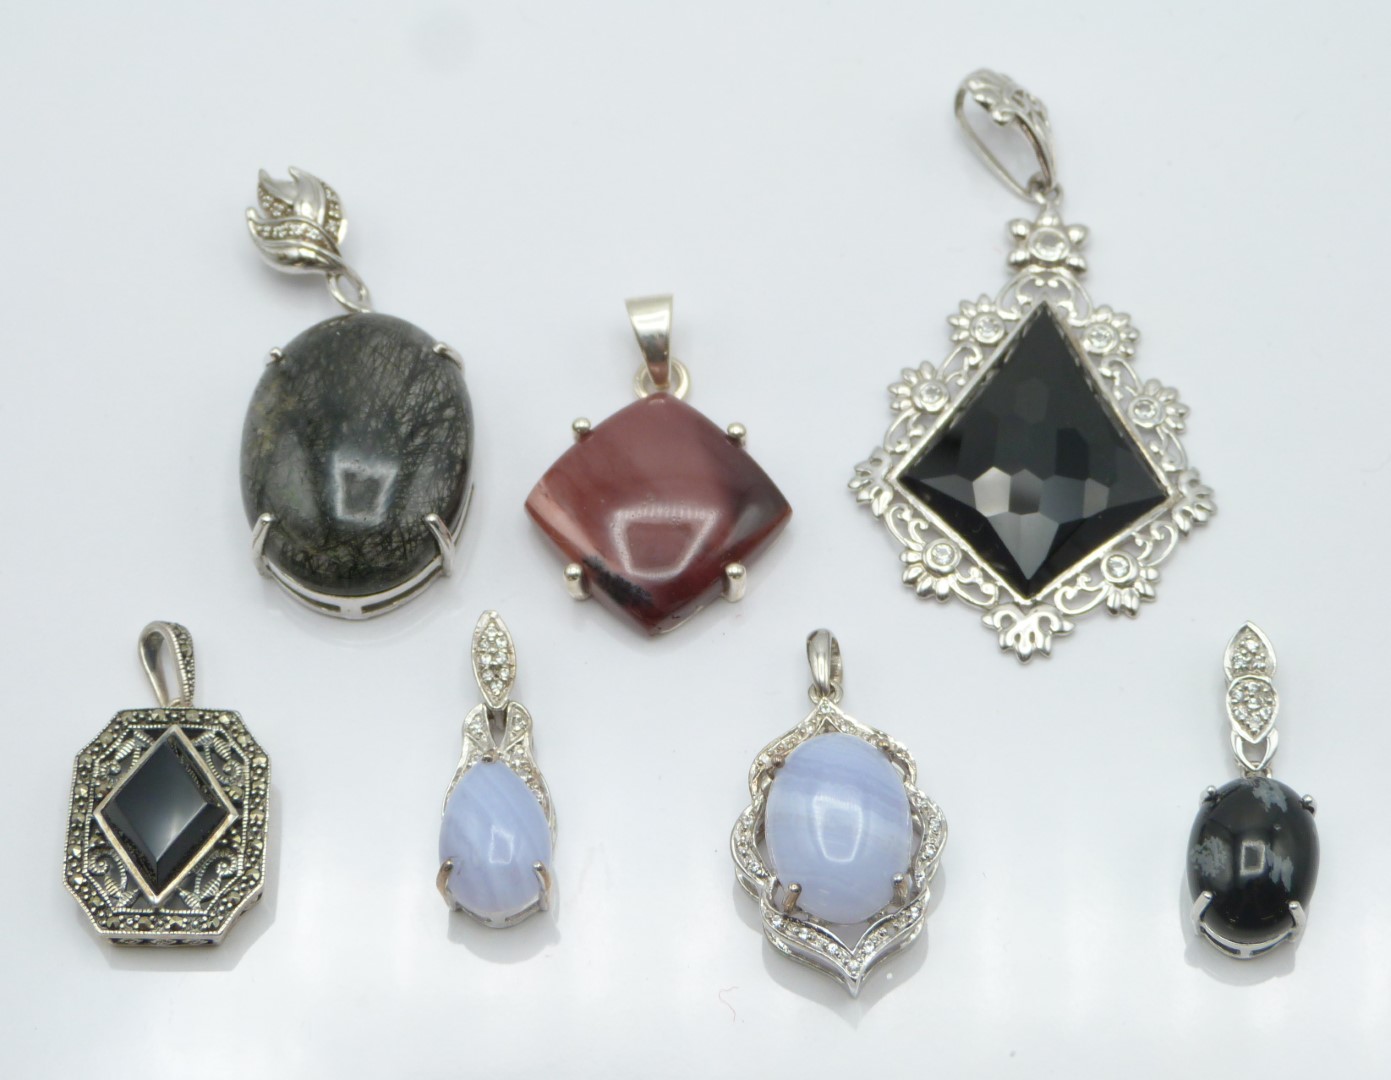 Seven silver pendants including set with rutile quartz, onyx, marcasite, obsidian and blue lace